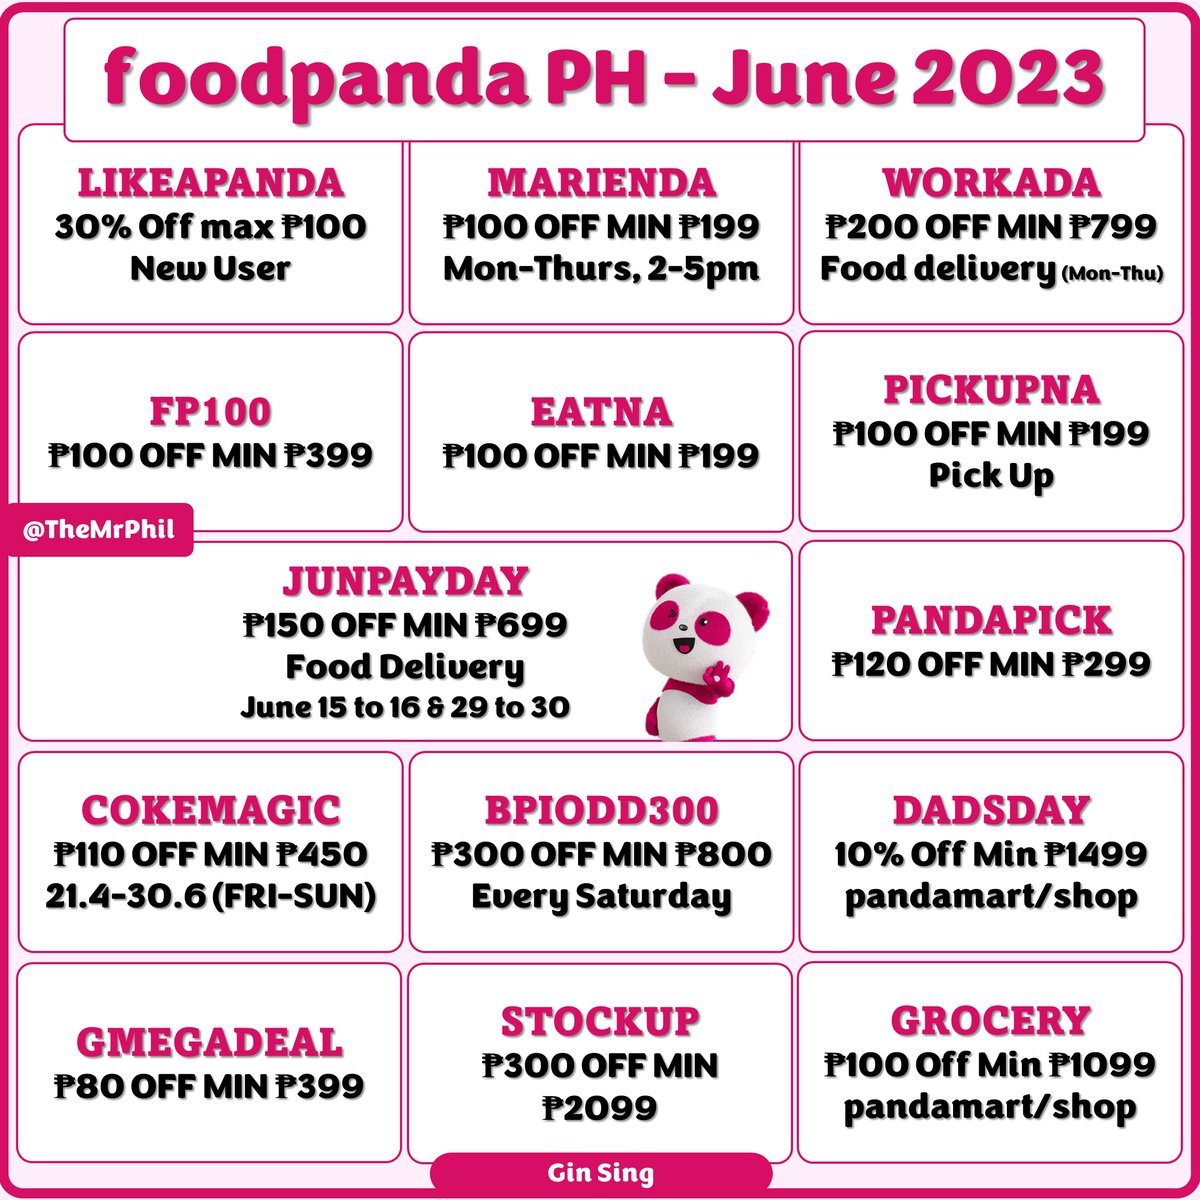 foodpanda Philippines - Today's Vouchers
Go: promocodes.my/order/foodpand…

LIKEAPANDA
30% Off max ₱100

FP100
₱100 OFF MIN ₱399

EATNA
₱100 OFF MIN ₱199

For complete list of vouchers
bit.ly/foodpandaPH-ju…

#foodpandaPH
~
Agoda PH Hotel Promotions
promocodes.my/agoda/ph